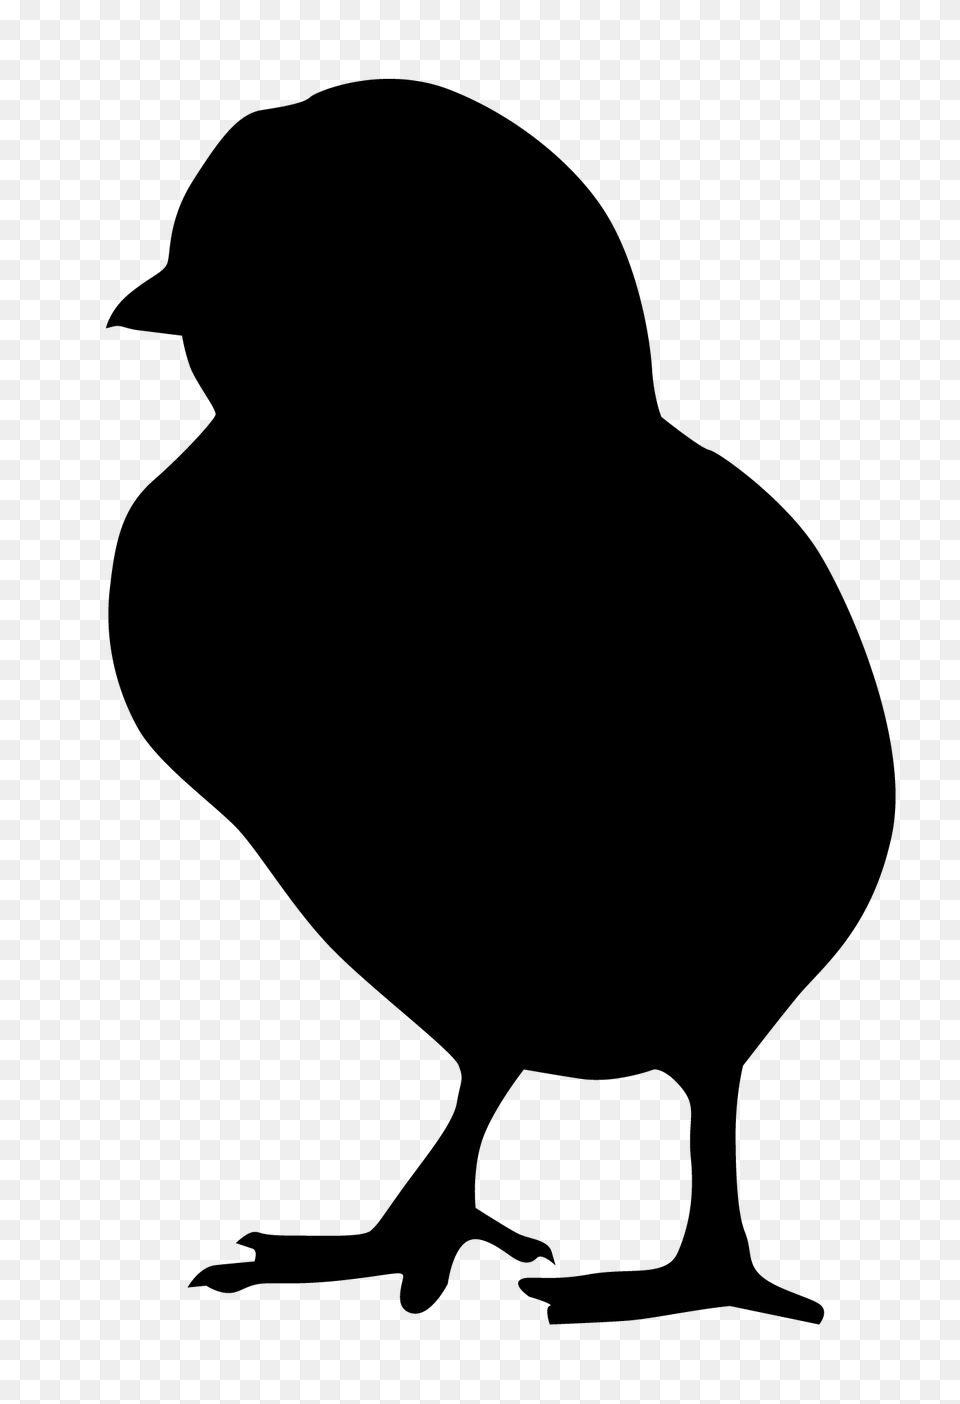 Chick Silhouette Png Image